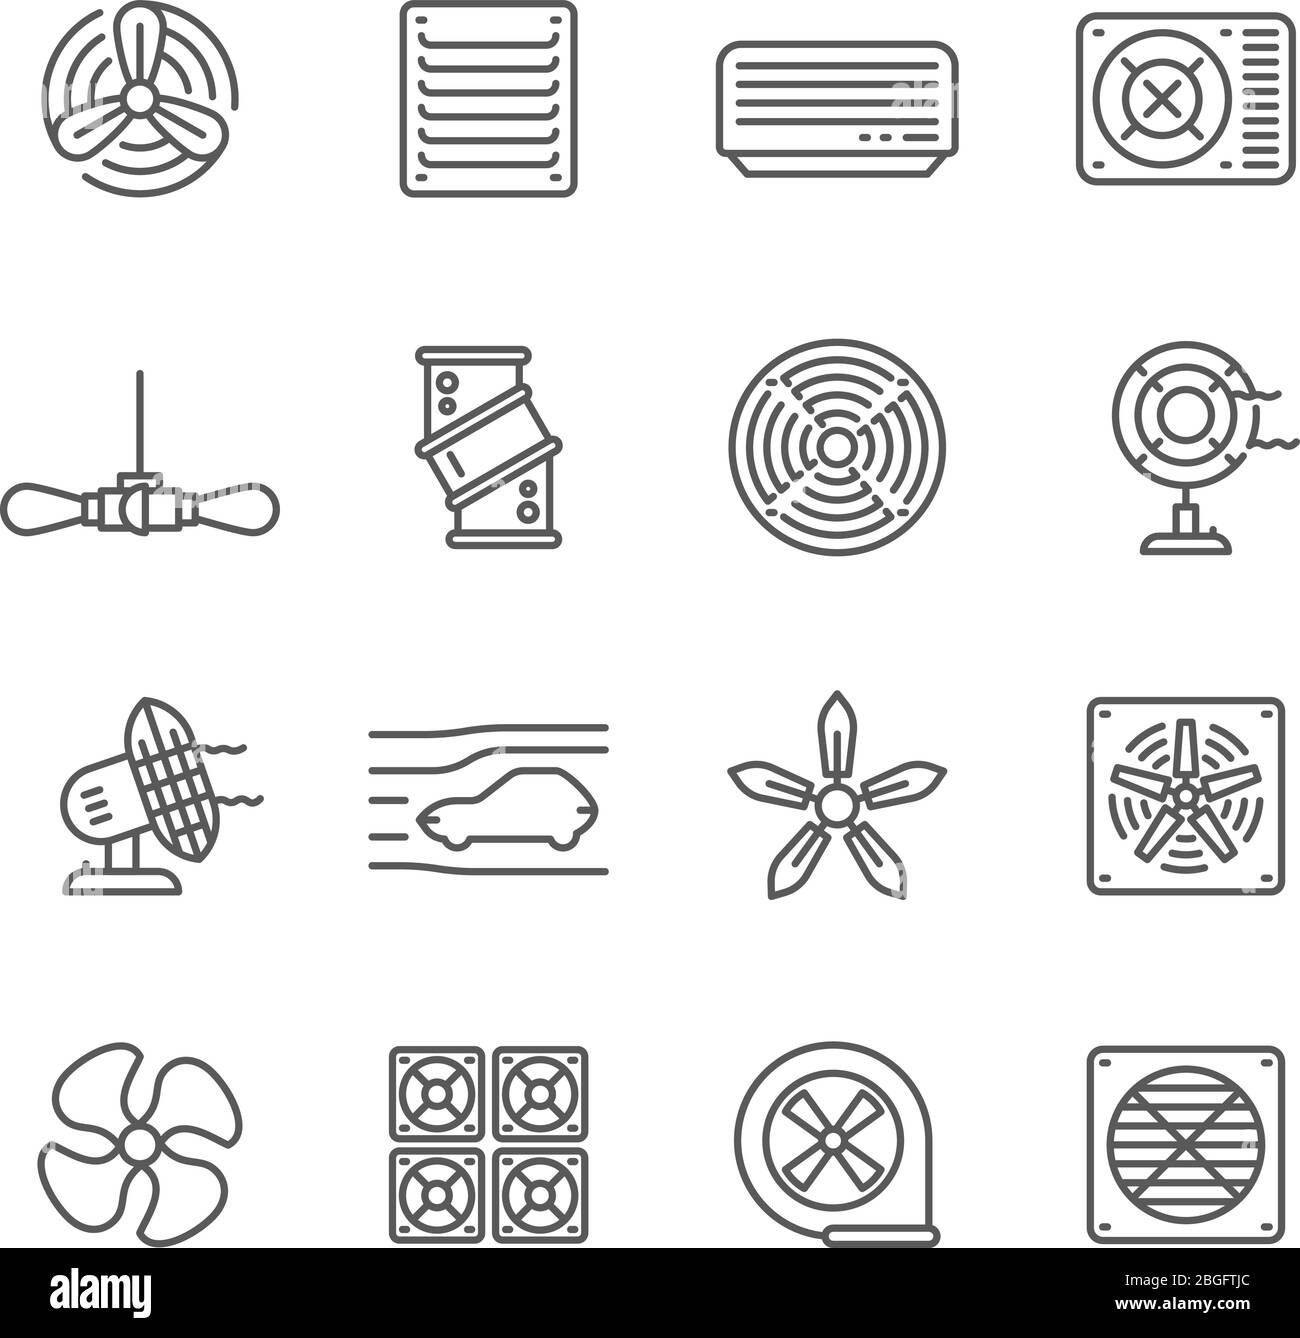 Heating and cooling airflow pictograms. Ventilation, airing filter, fan, blower, aerodynamics, turbine air vector icons. Illustration of airflow ventilator, fan ventilation, cooler equipment Stock Vector